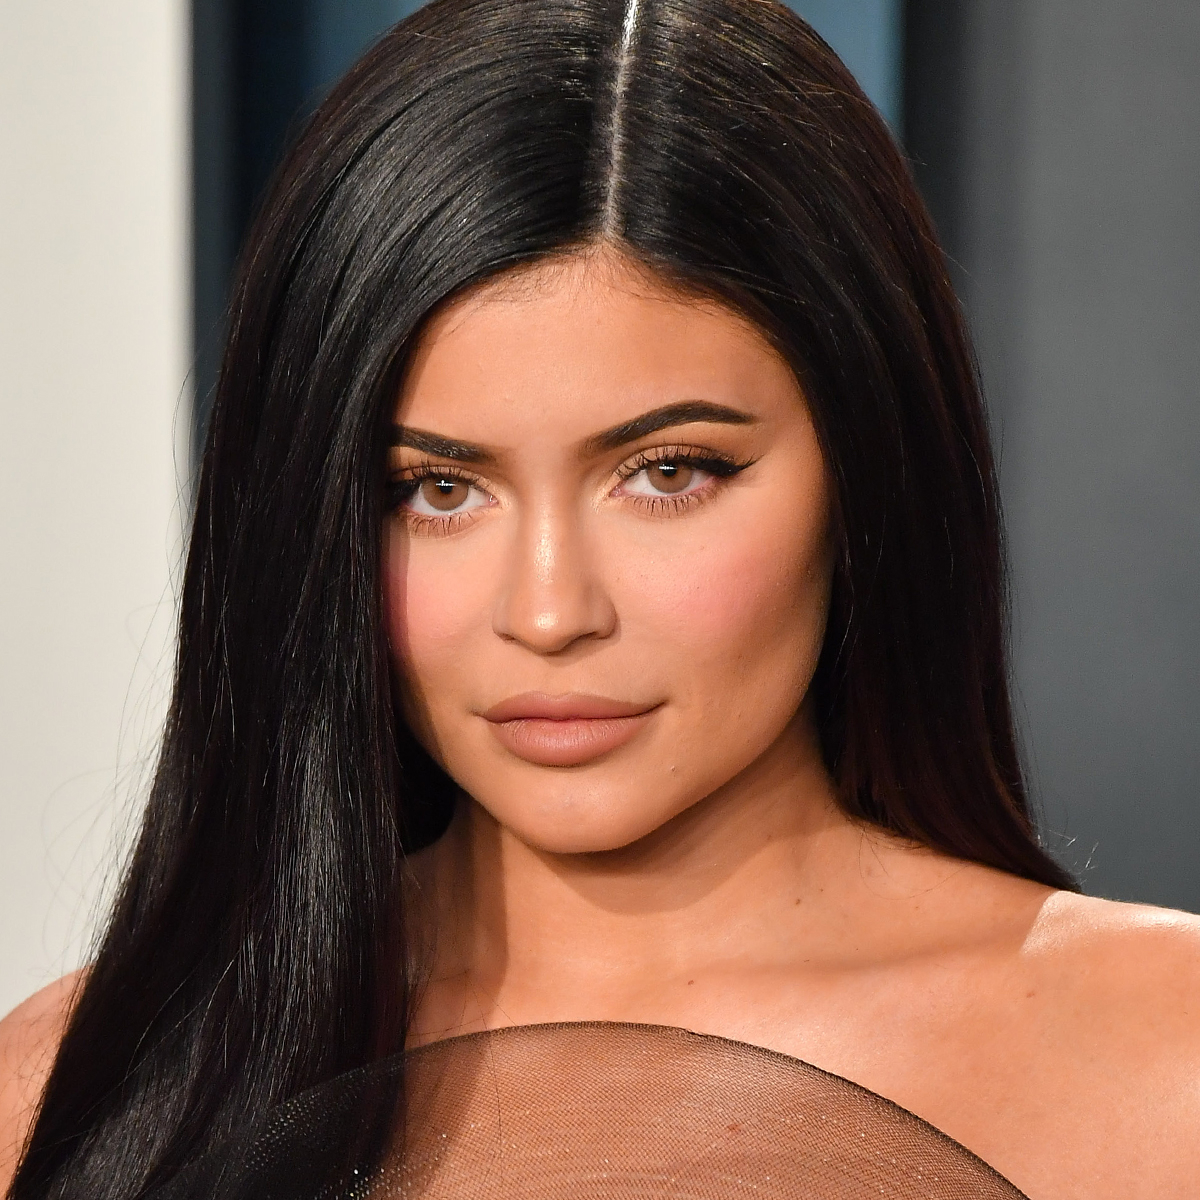 Kylie Jenner Shares She Gained 60 Pounds During Pregnancy With Baby #2